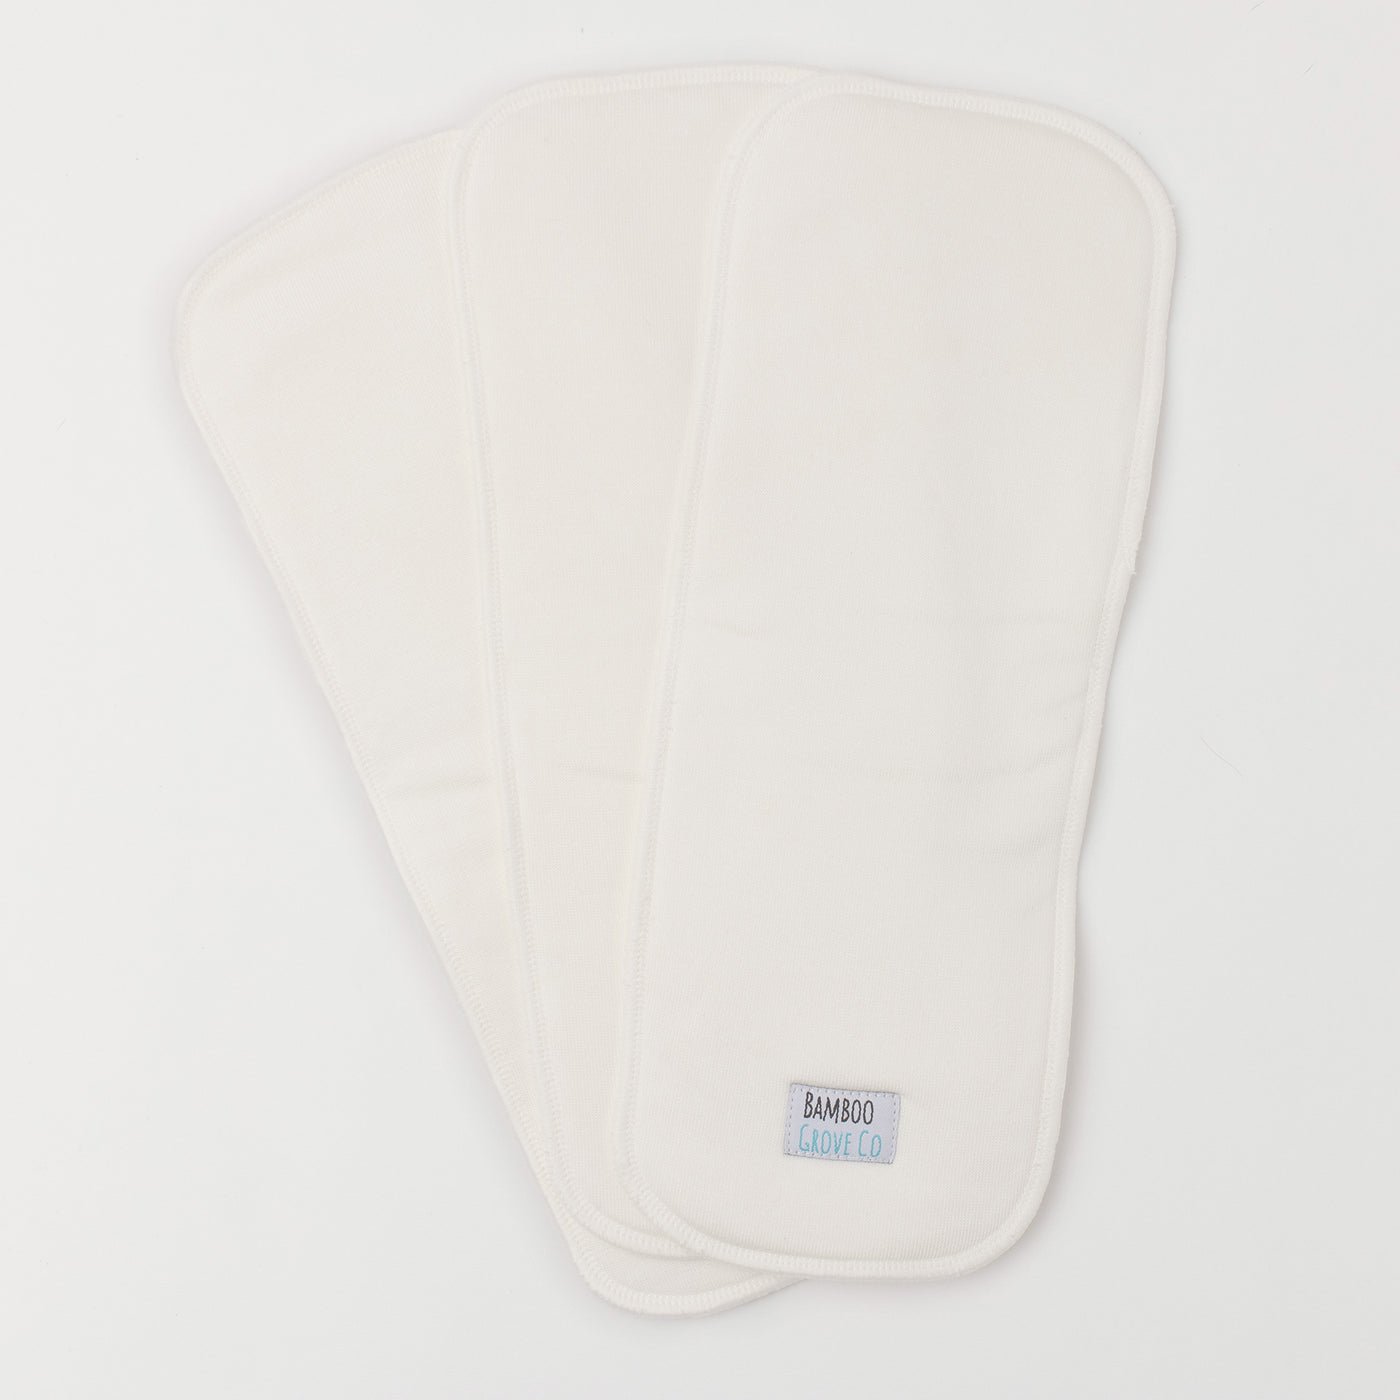 Bamboo nappy insert for modern cloth nappies